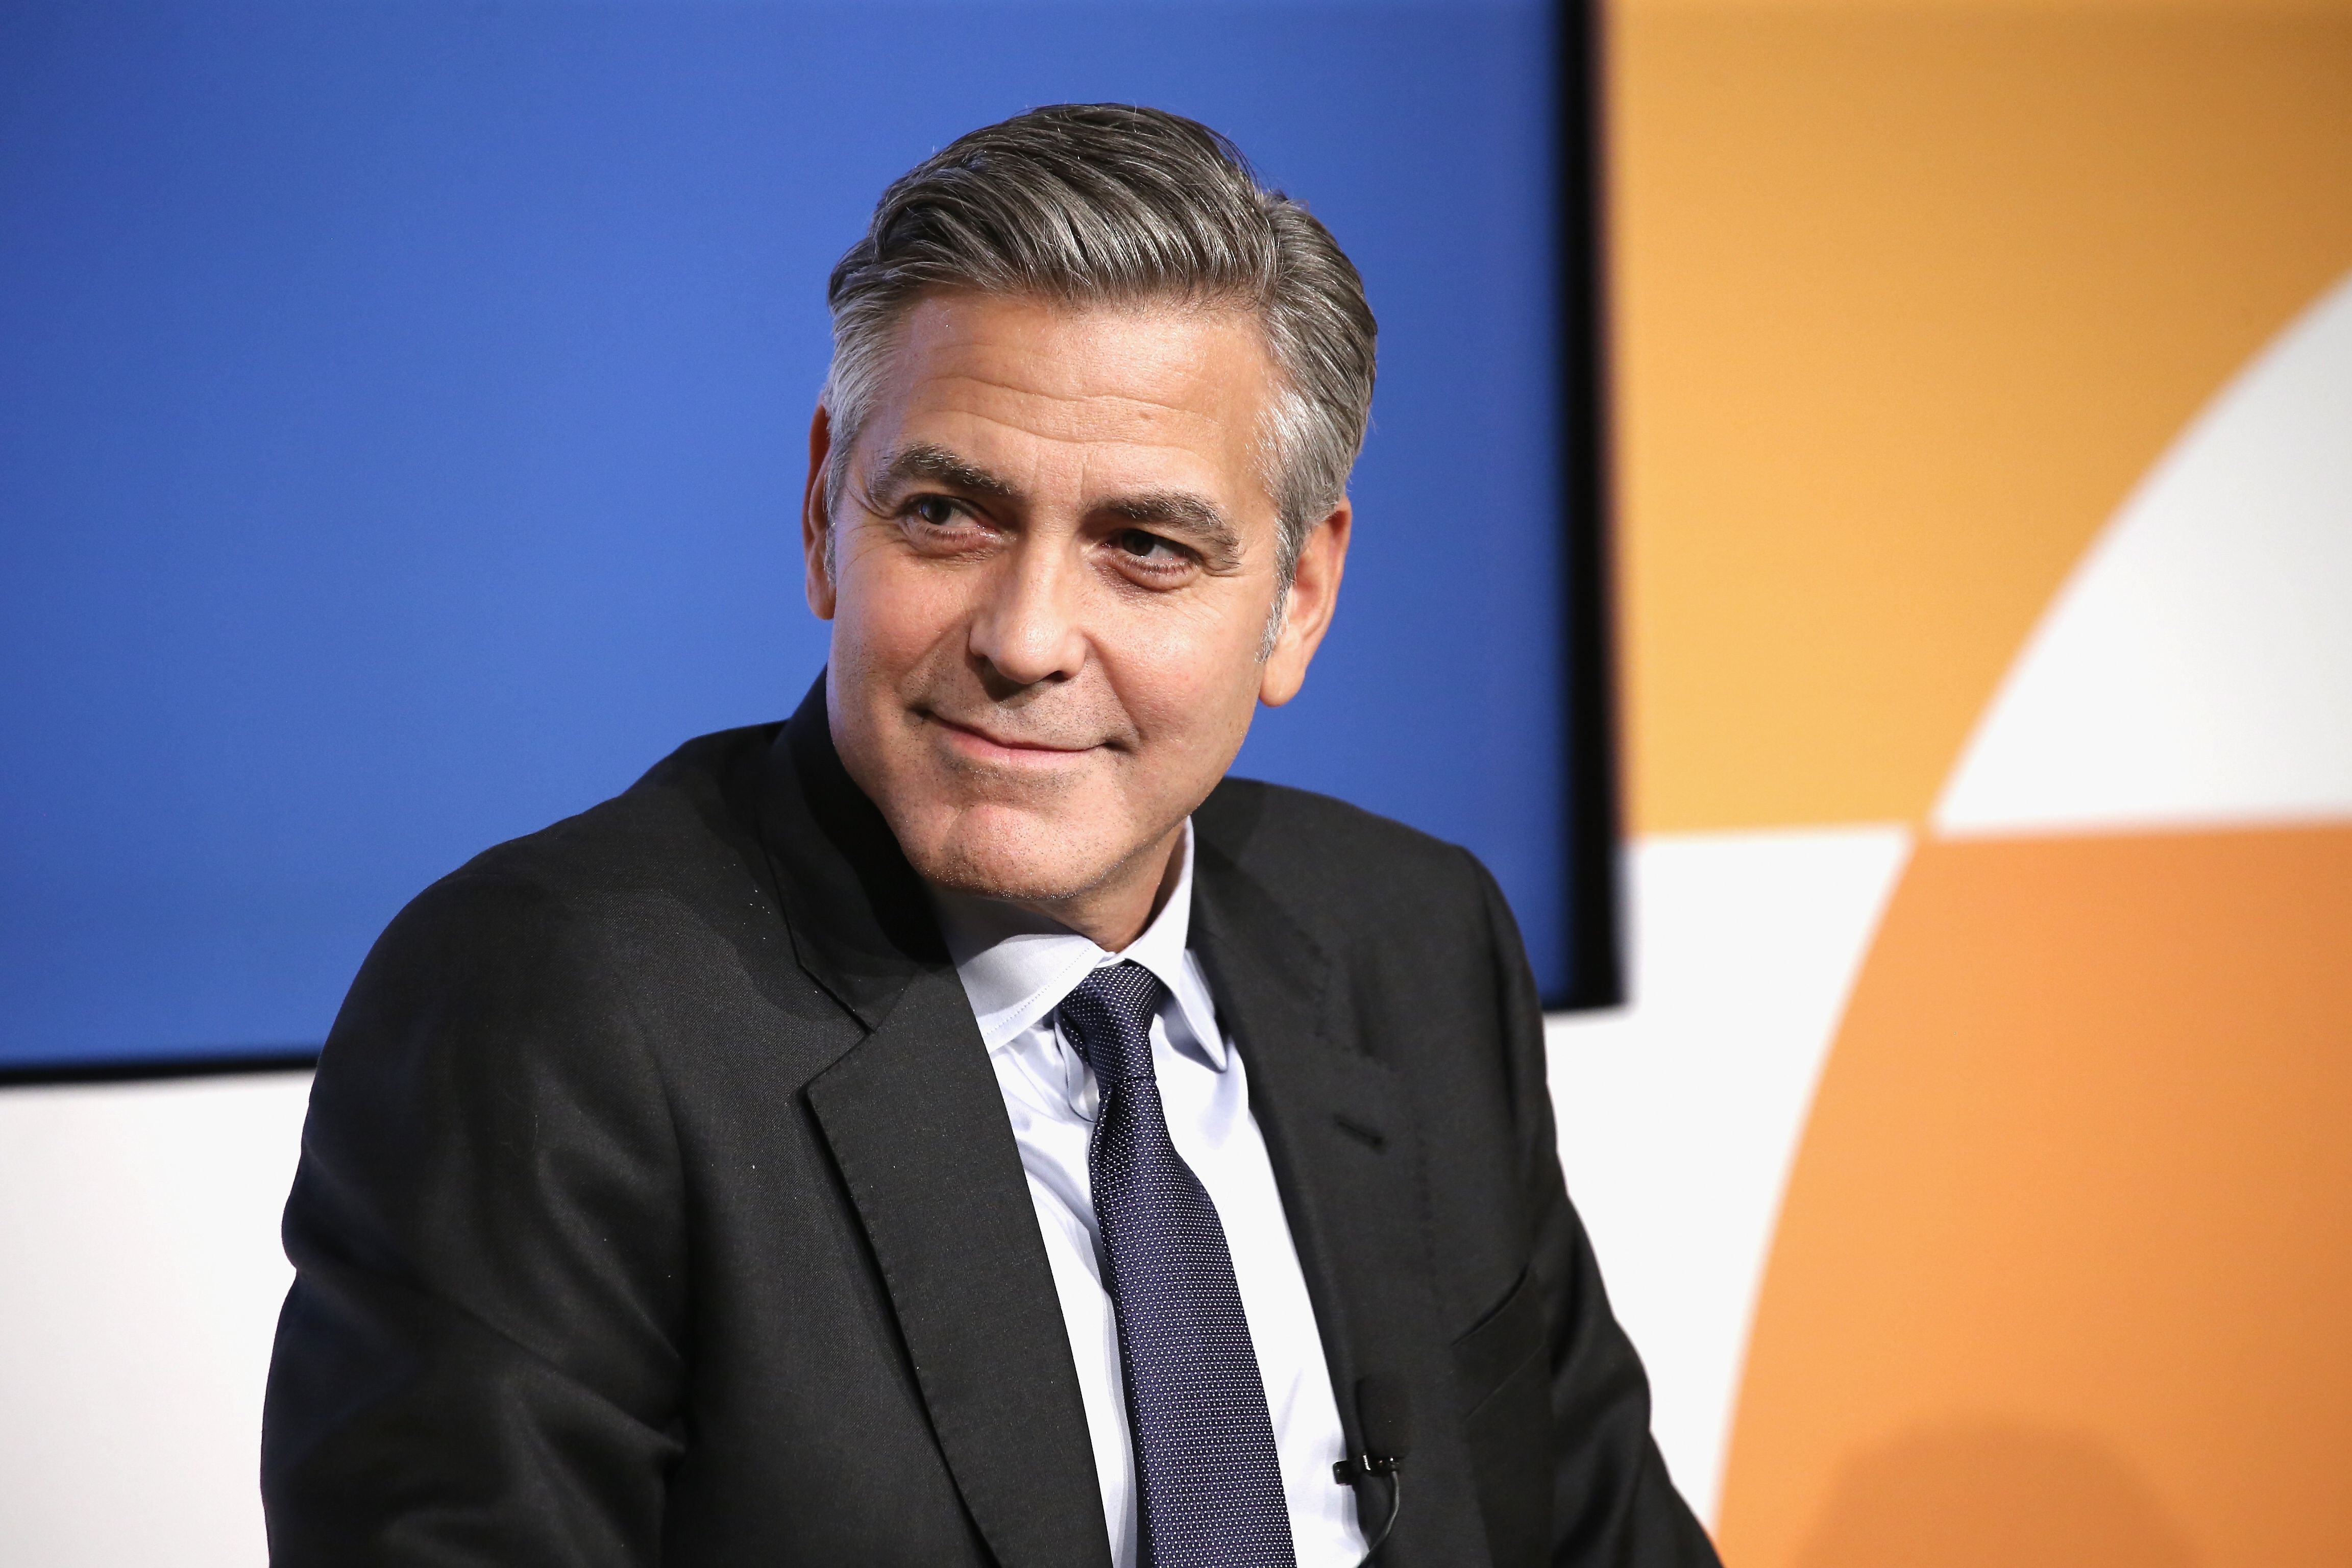 George Clooney at The 100 LIVES initiative on March 10, 2015 | Photo: Getty Images